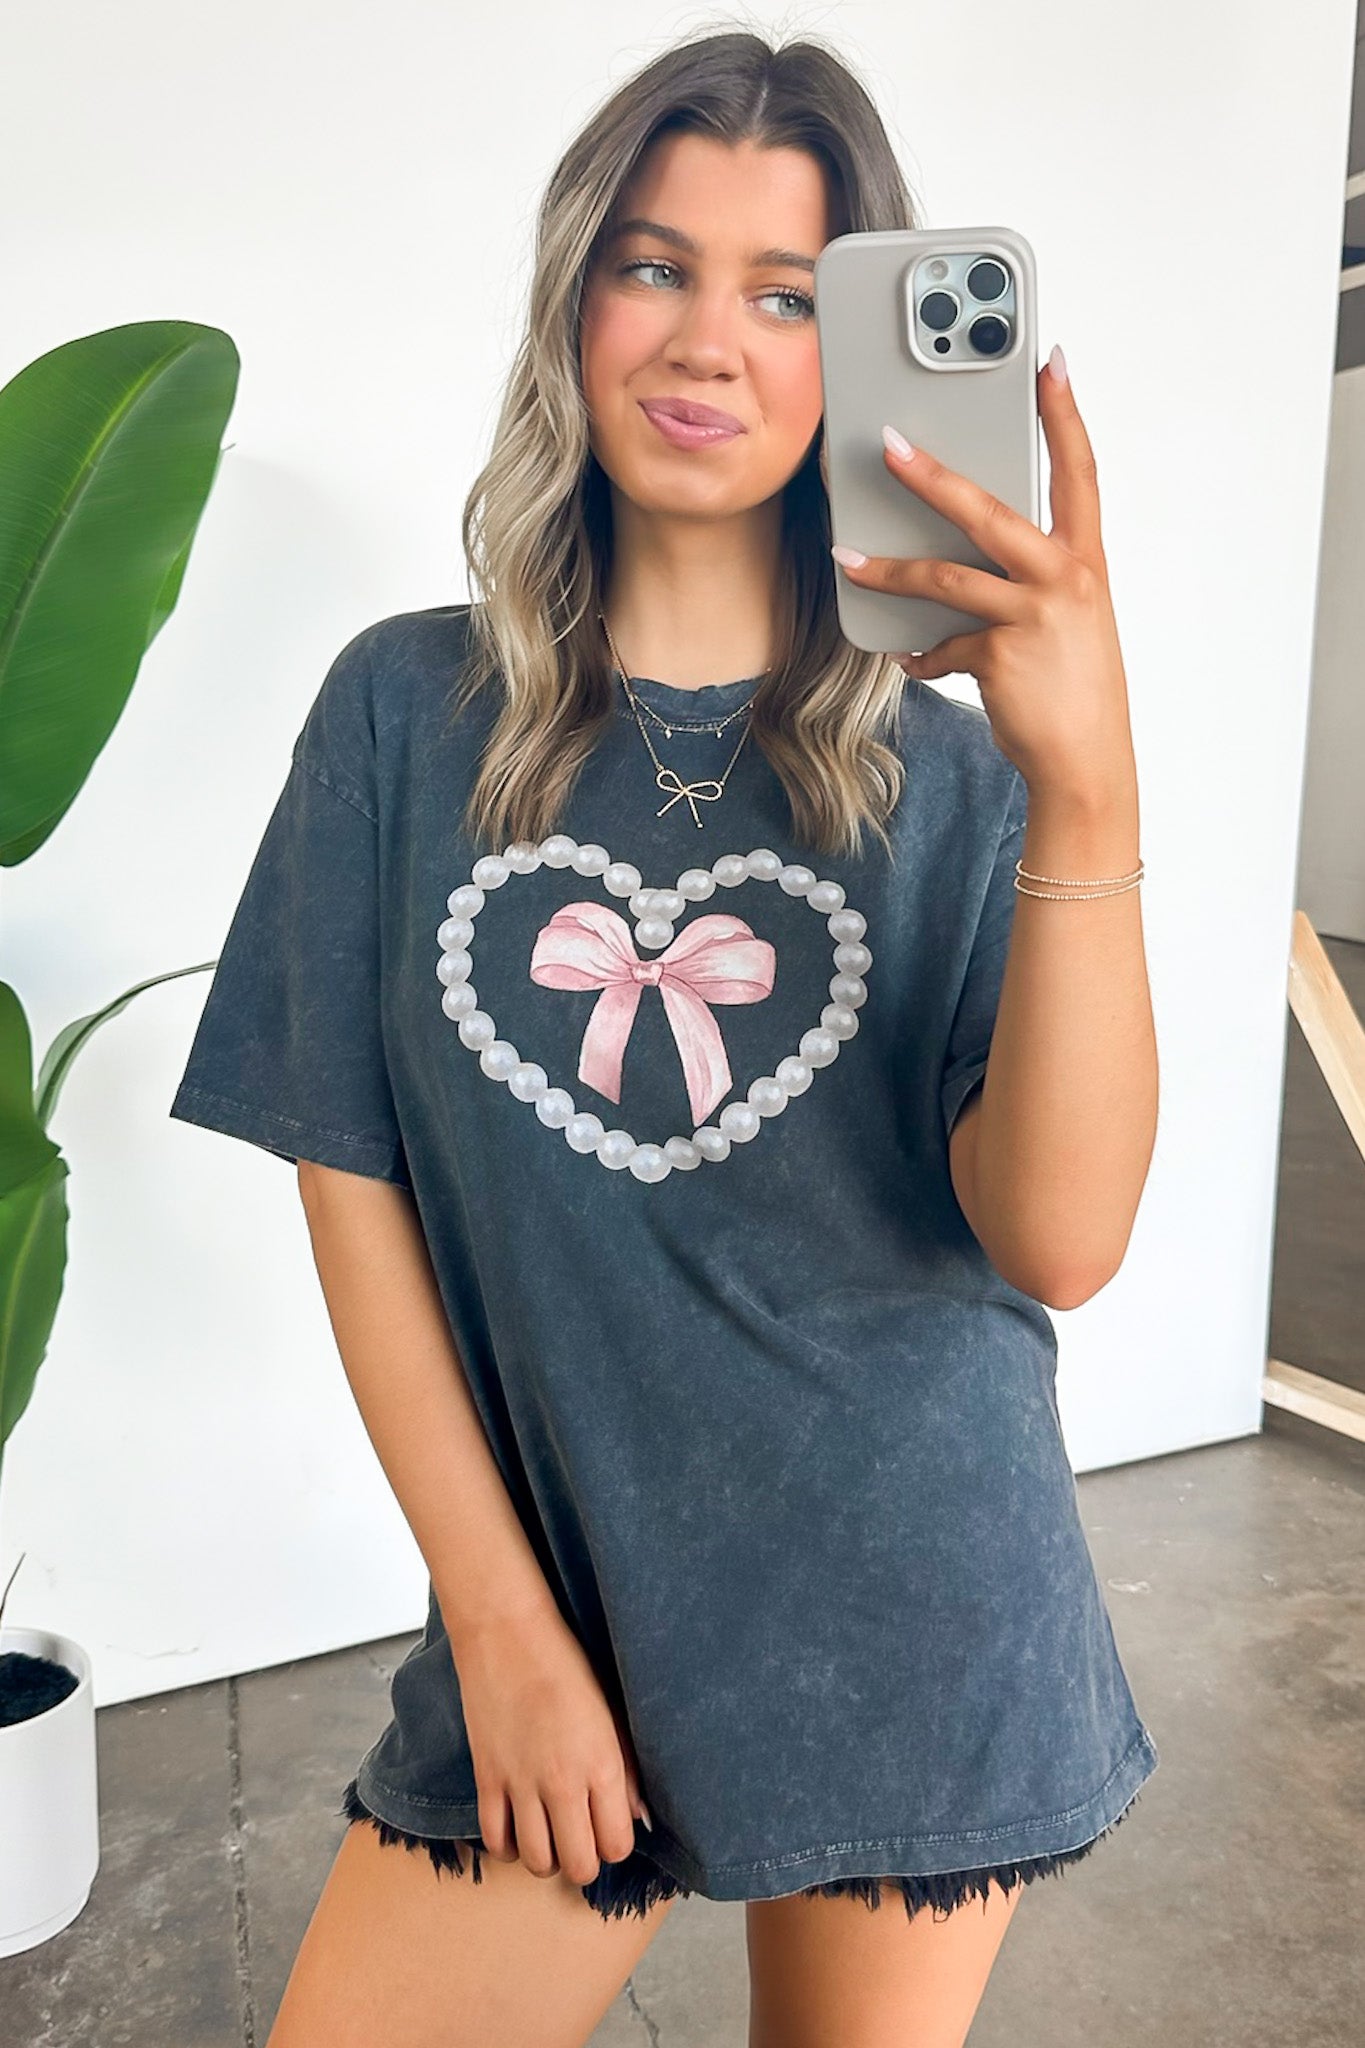  Pearls and Bows Vintage Graphic Tee - Madison and Mallory